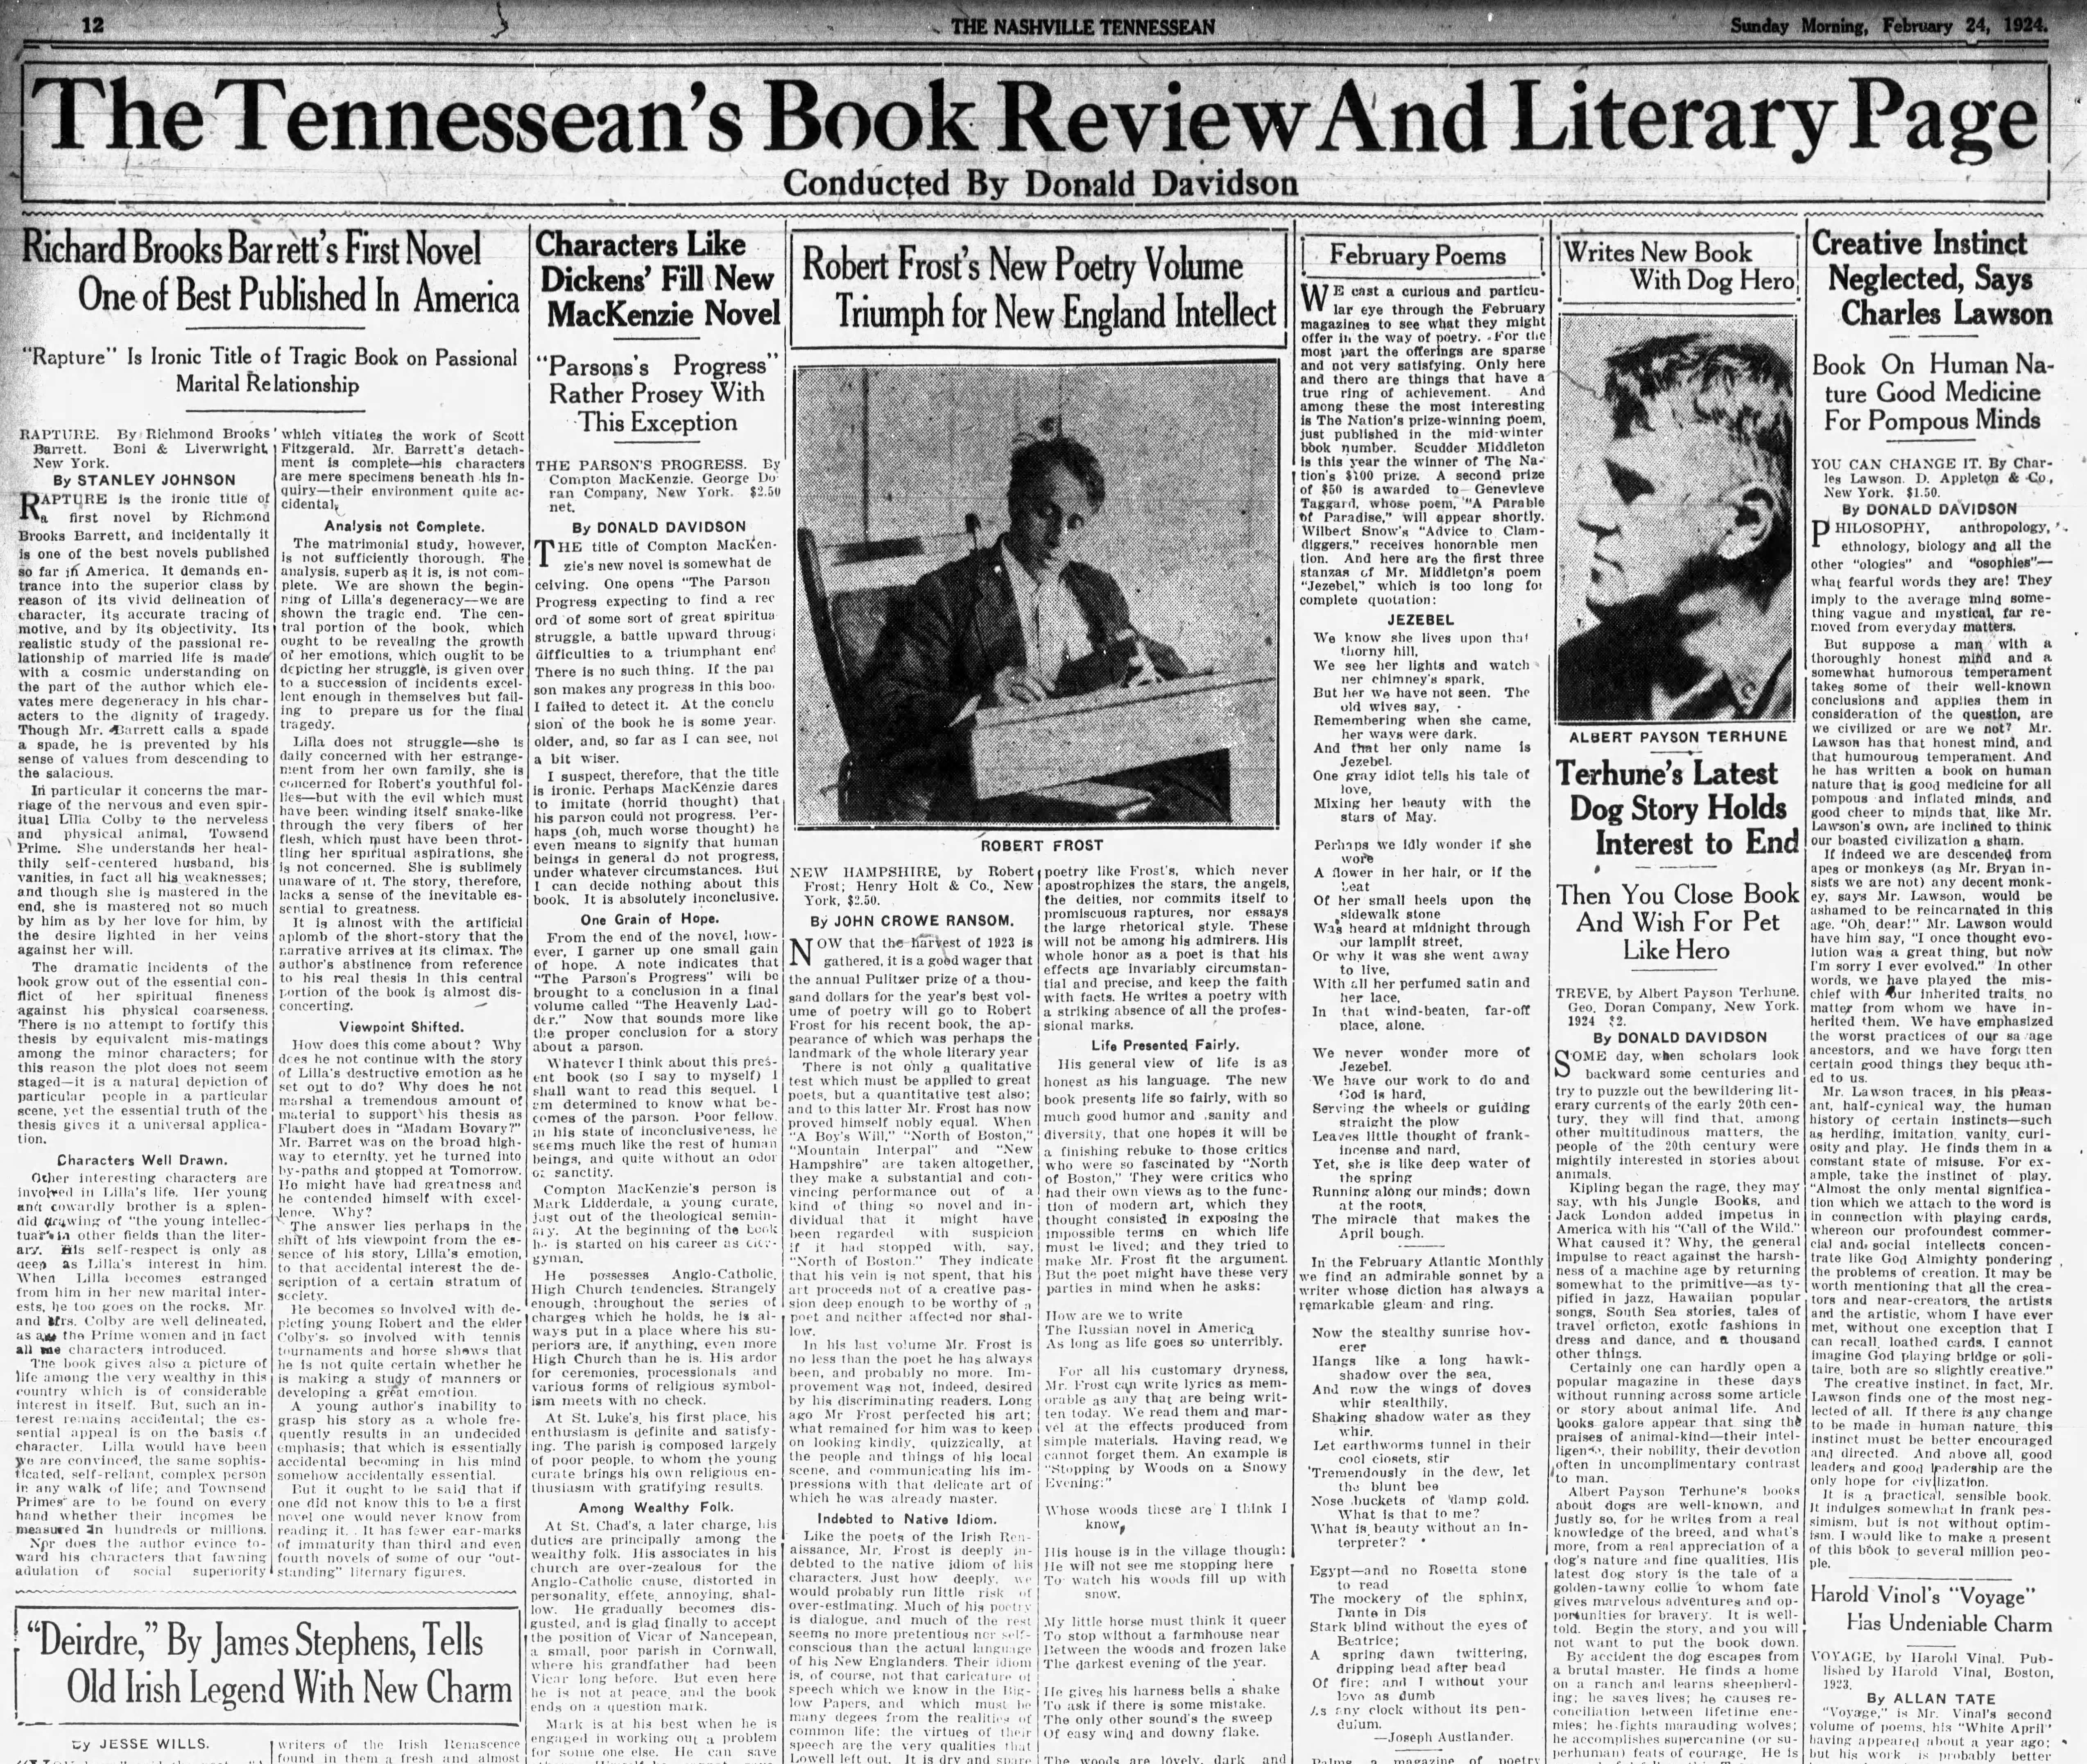 Donald Davidson and the Tennessean’s Book Page